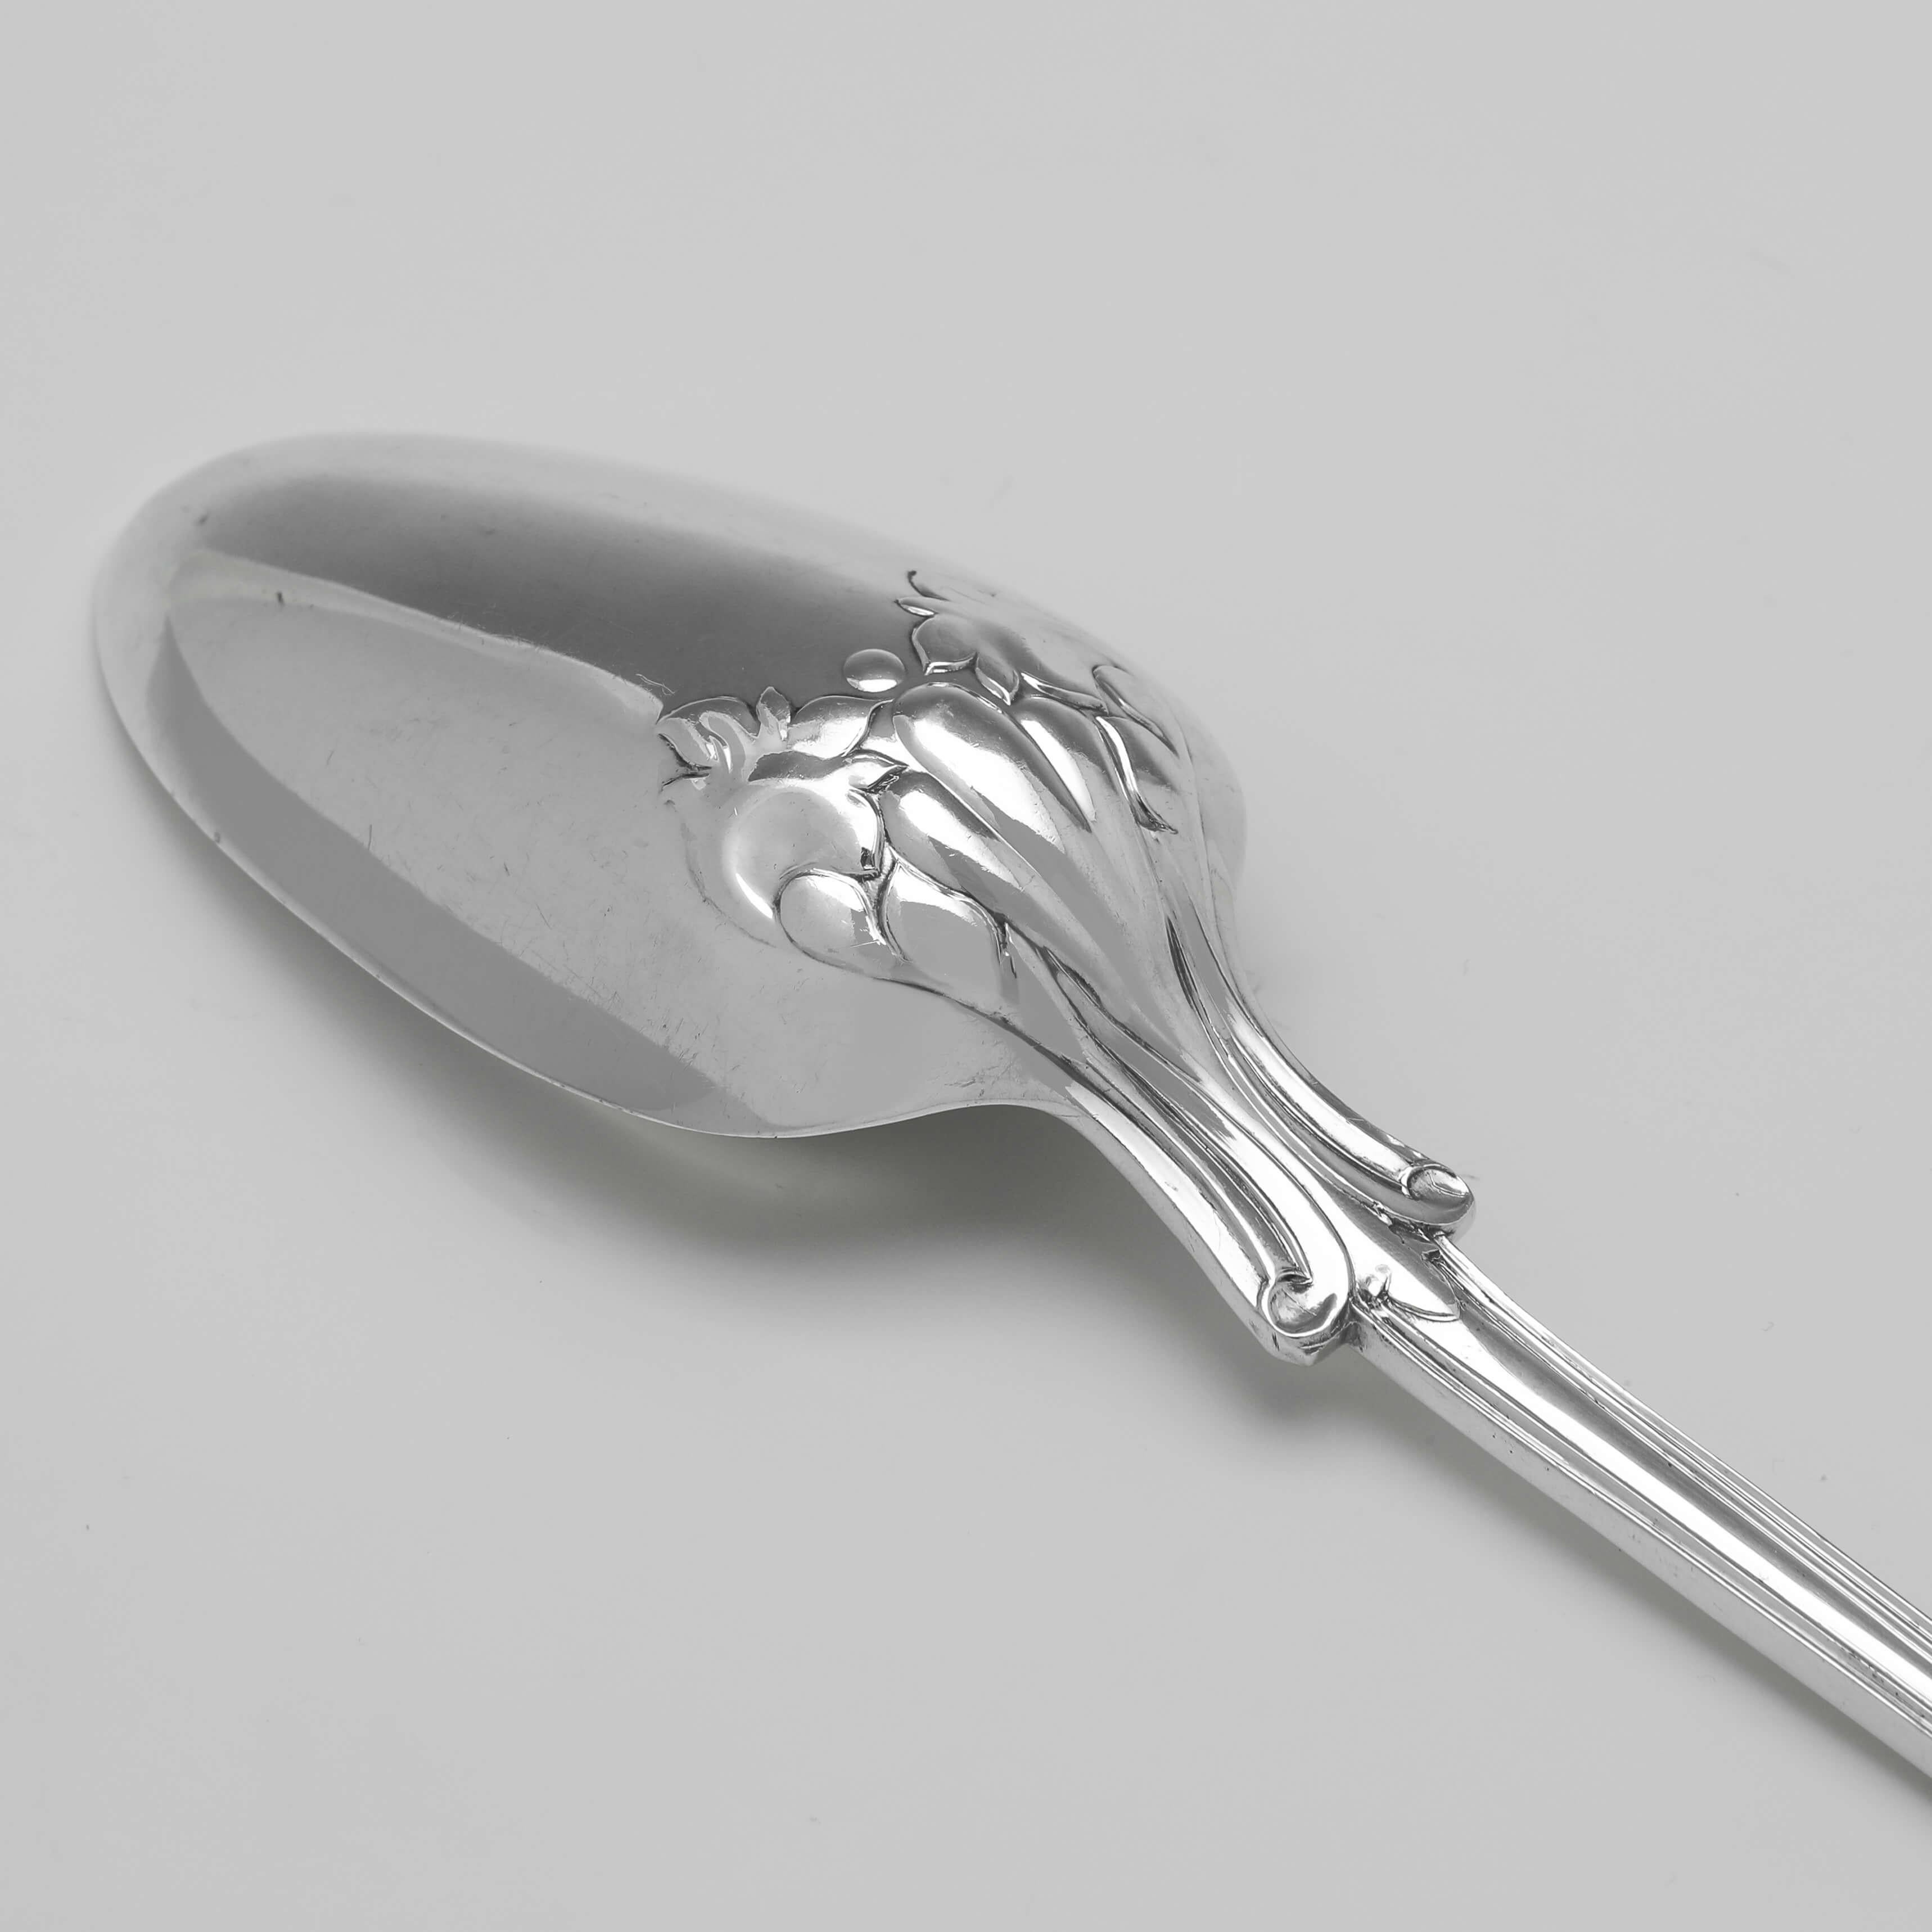 English Sterling Silver 'Victoria' Pattern Basting Spoon - London 1855 For Sale